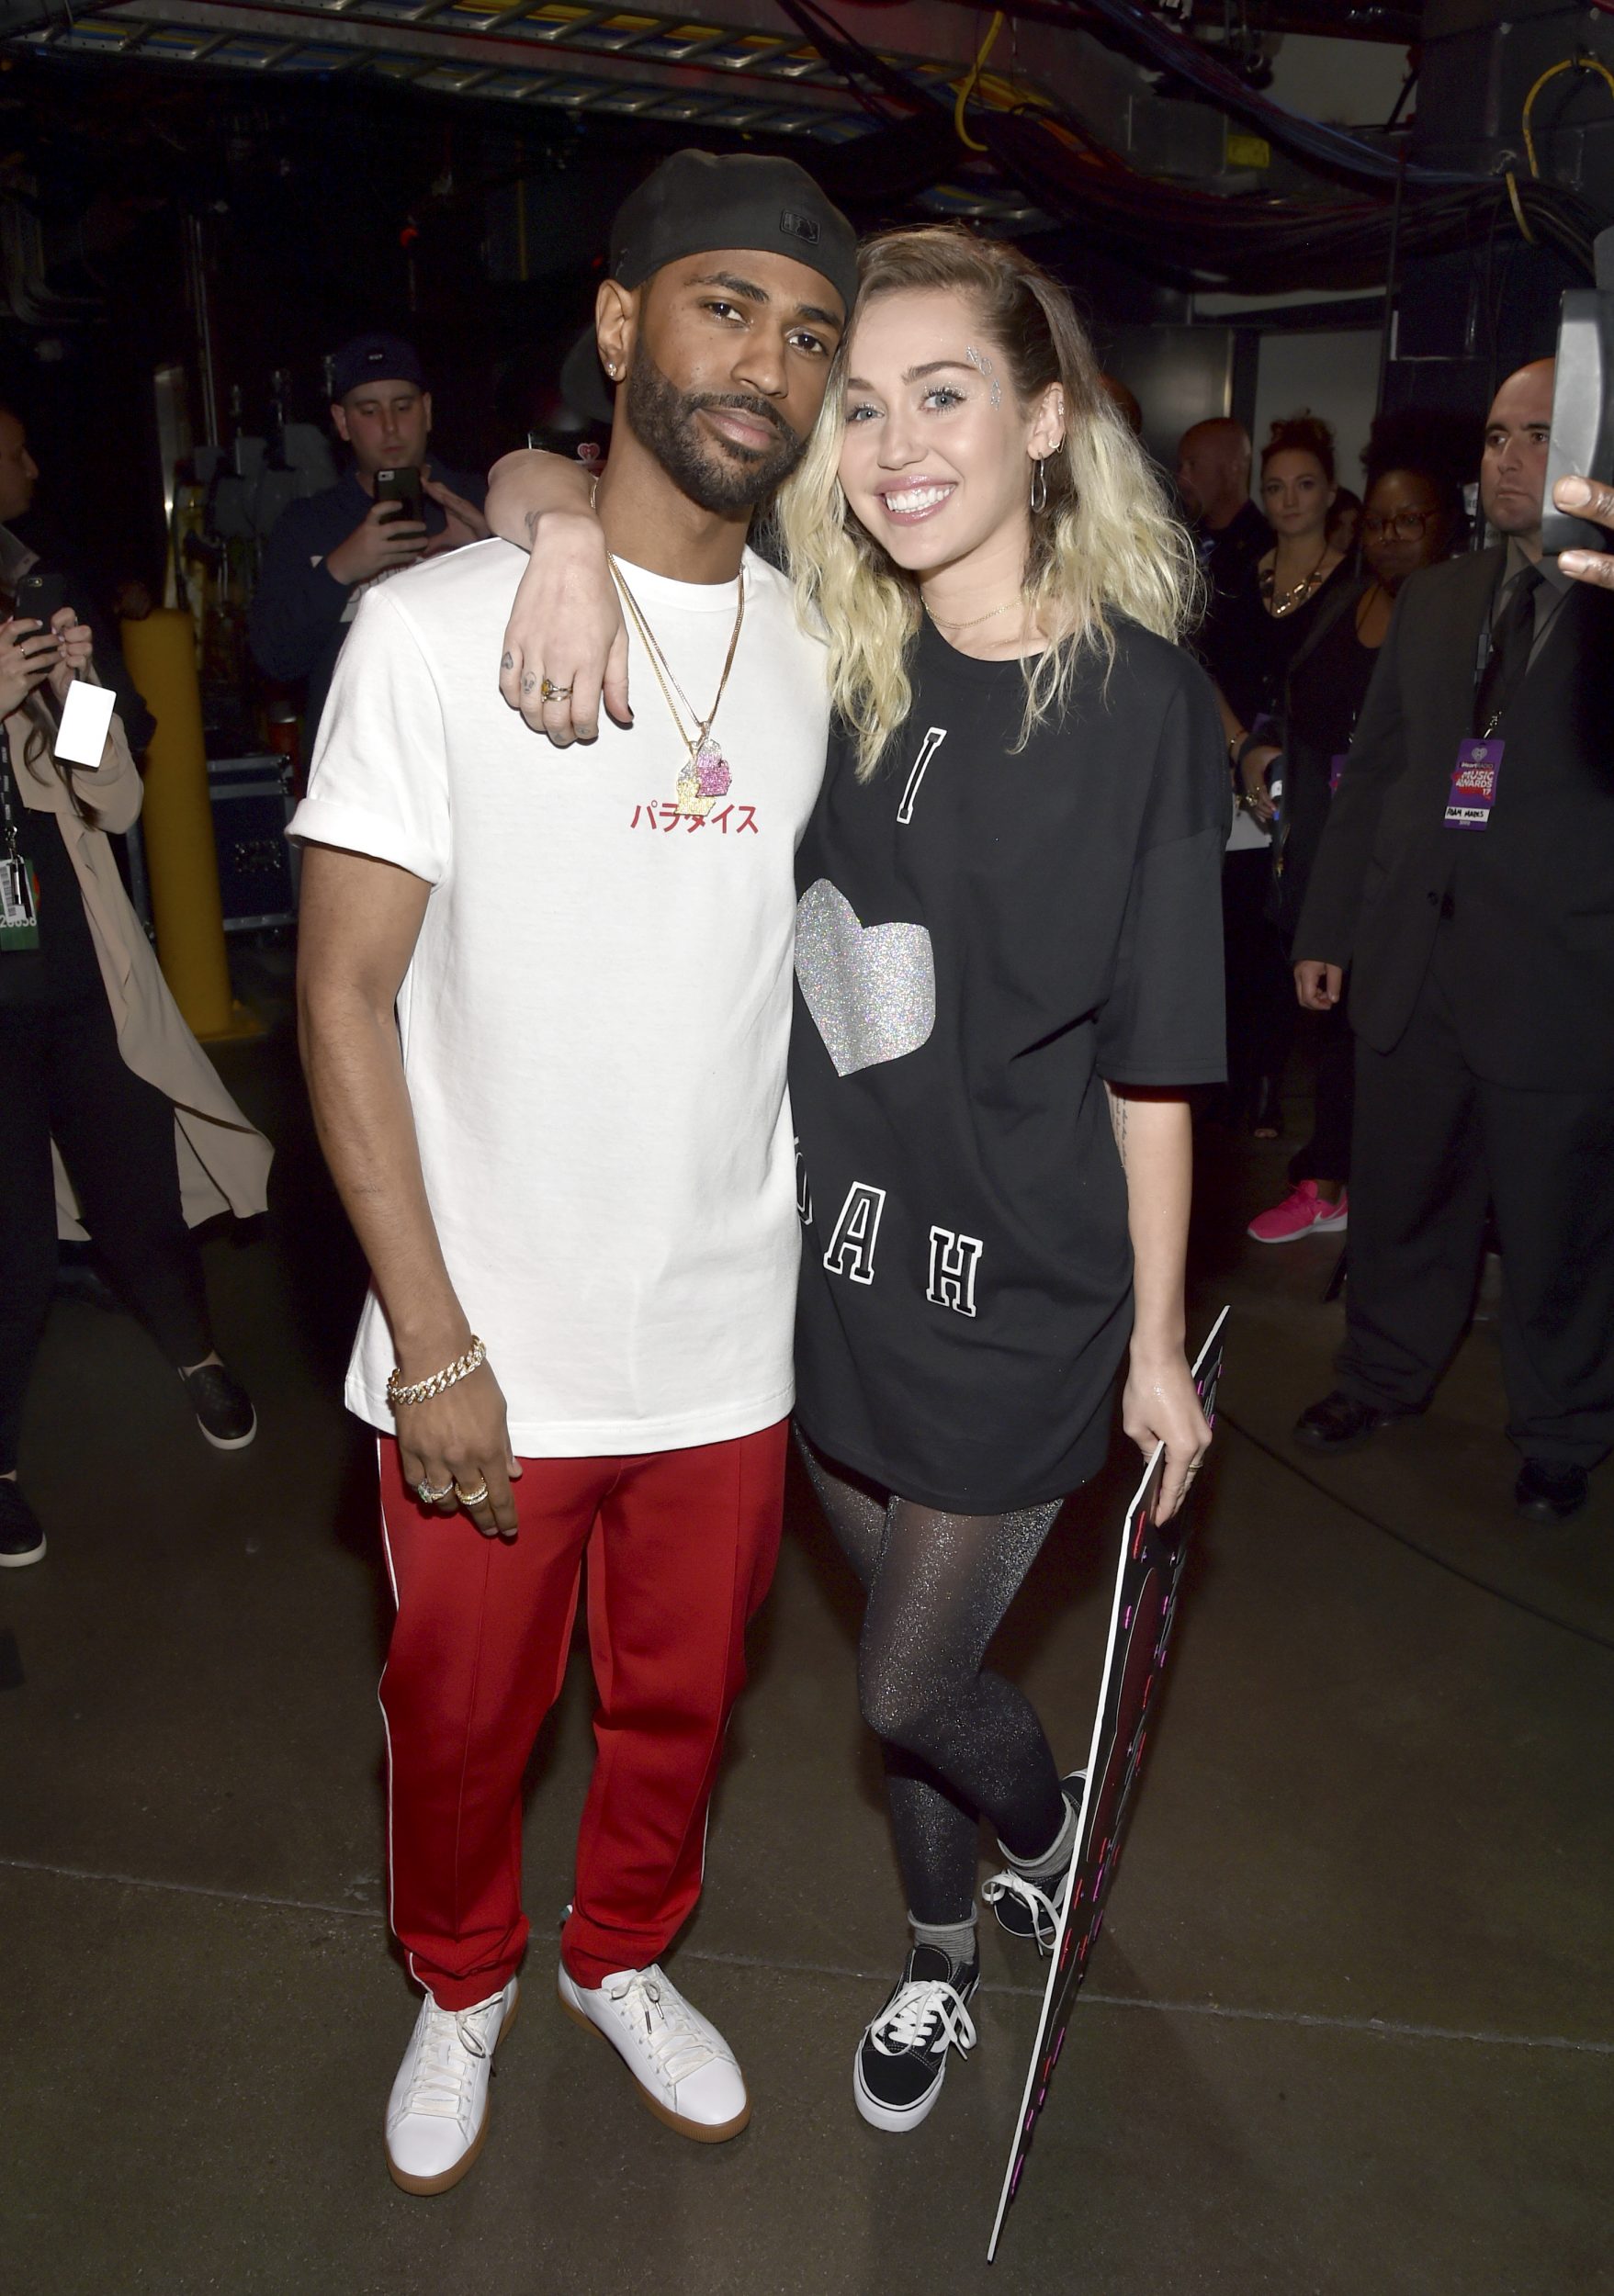 INGLEWOOD, CA - MARCH 05: Musicians Big Sean (L) and Miley Cyrus backstage at the 2017 iHeartRadio Music Awards which broadcast live on Turner's TBS, TNT, and truTV at The Forum on March 5, 2017 in Inglewood, California. (Photo by Frazer Harrison/Getty Images for iHeartMedia) *** Local Caption *** Big Sean; Miley Cyrus